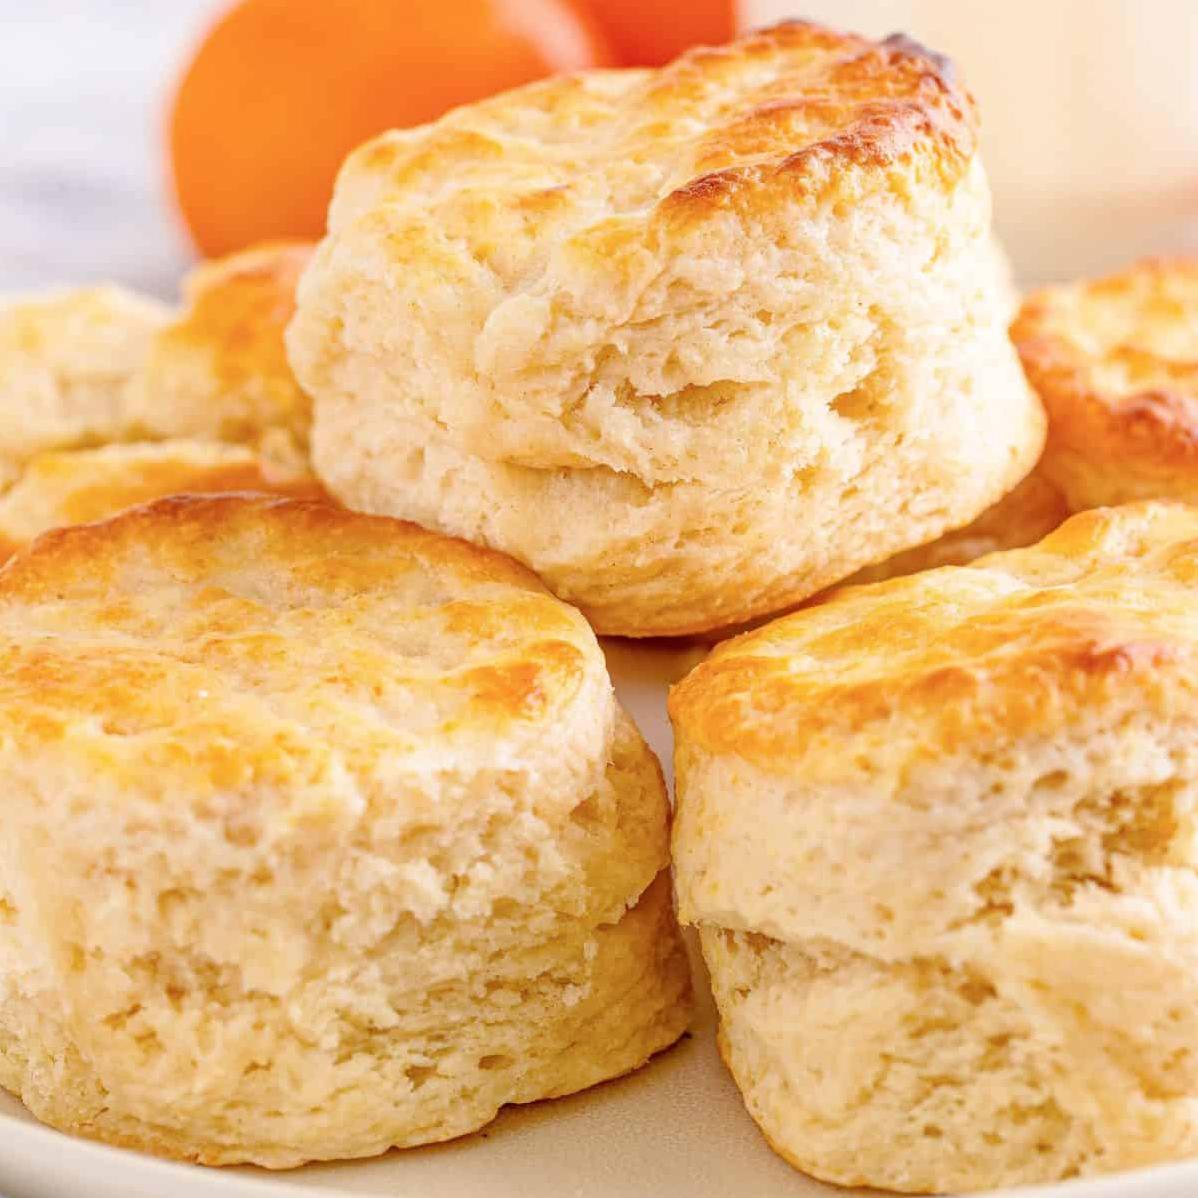  Fluffy, buttery biscuits perfect for any meal!